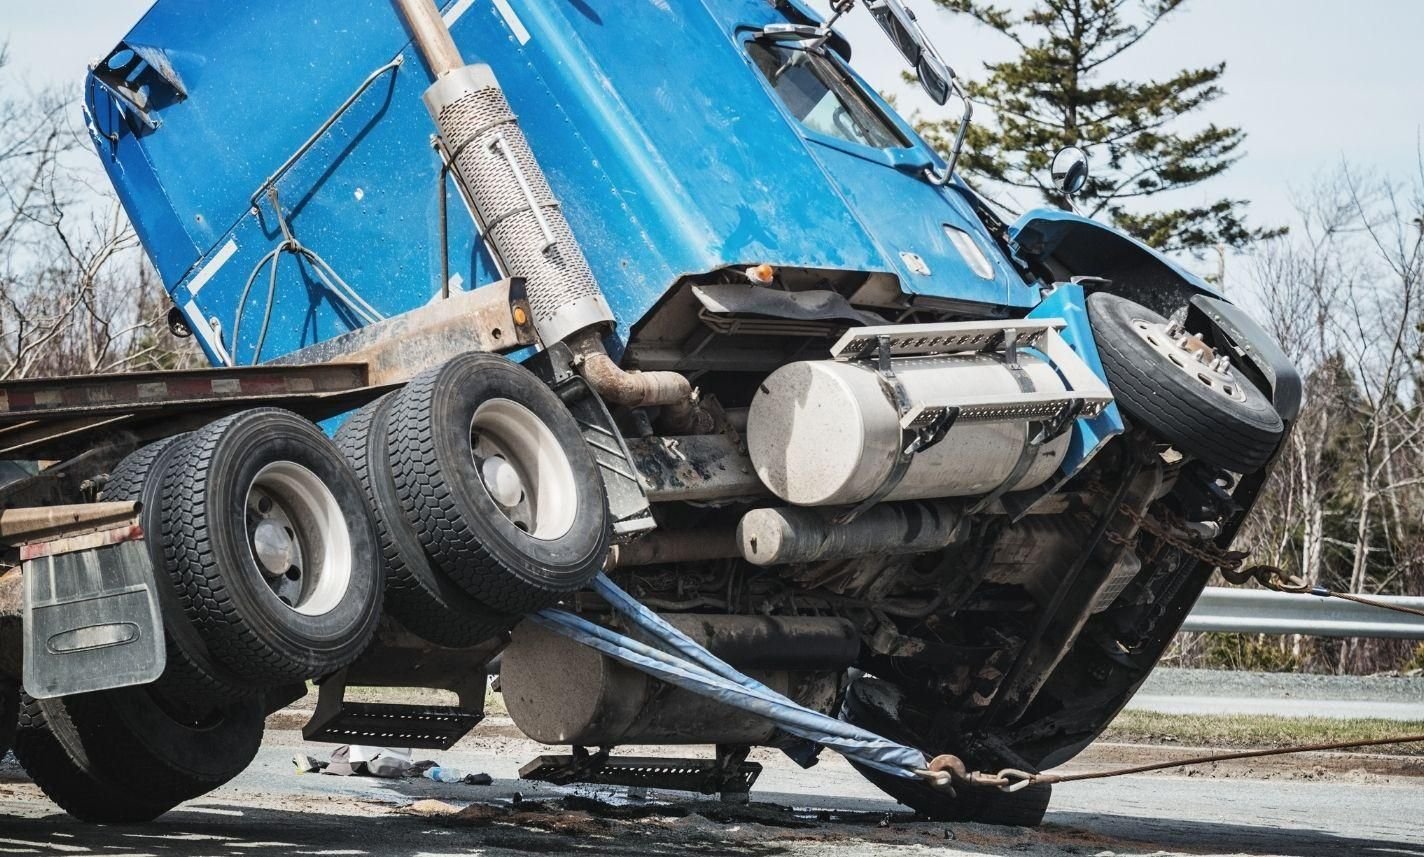 darien-commercial-truck-accident-injury-lawyer